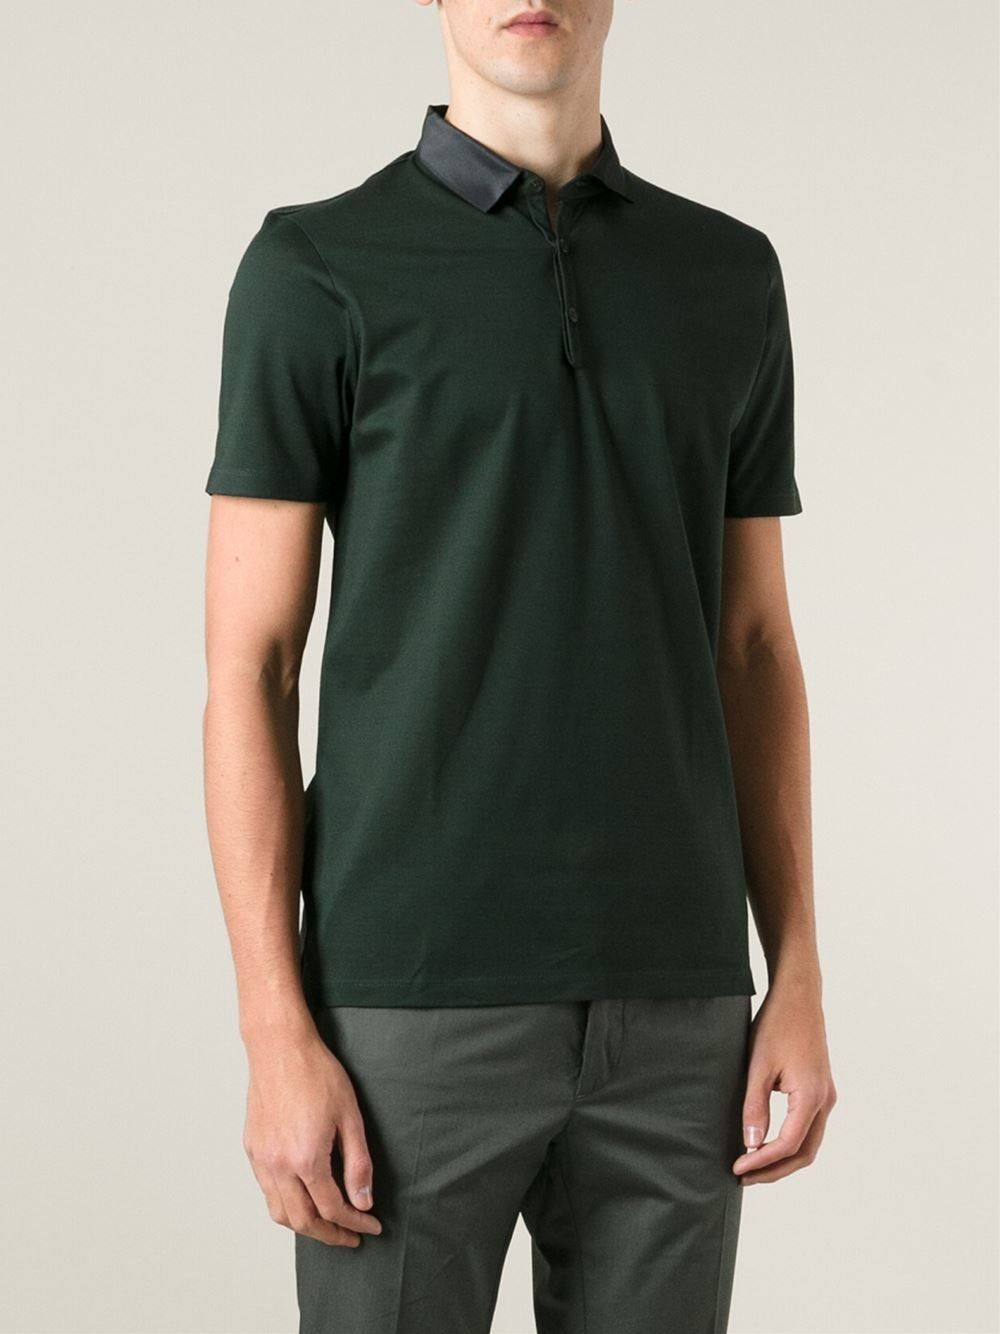 Lanvin Contrasting Satin Collar Polo Shirt in Green for Men - Lyst